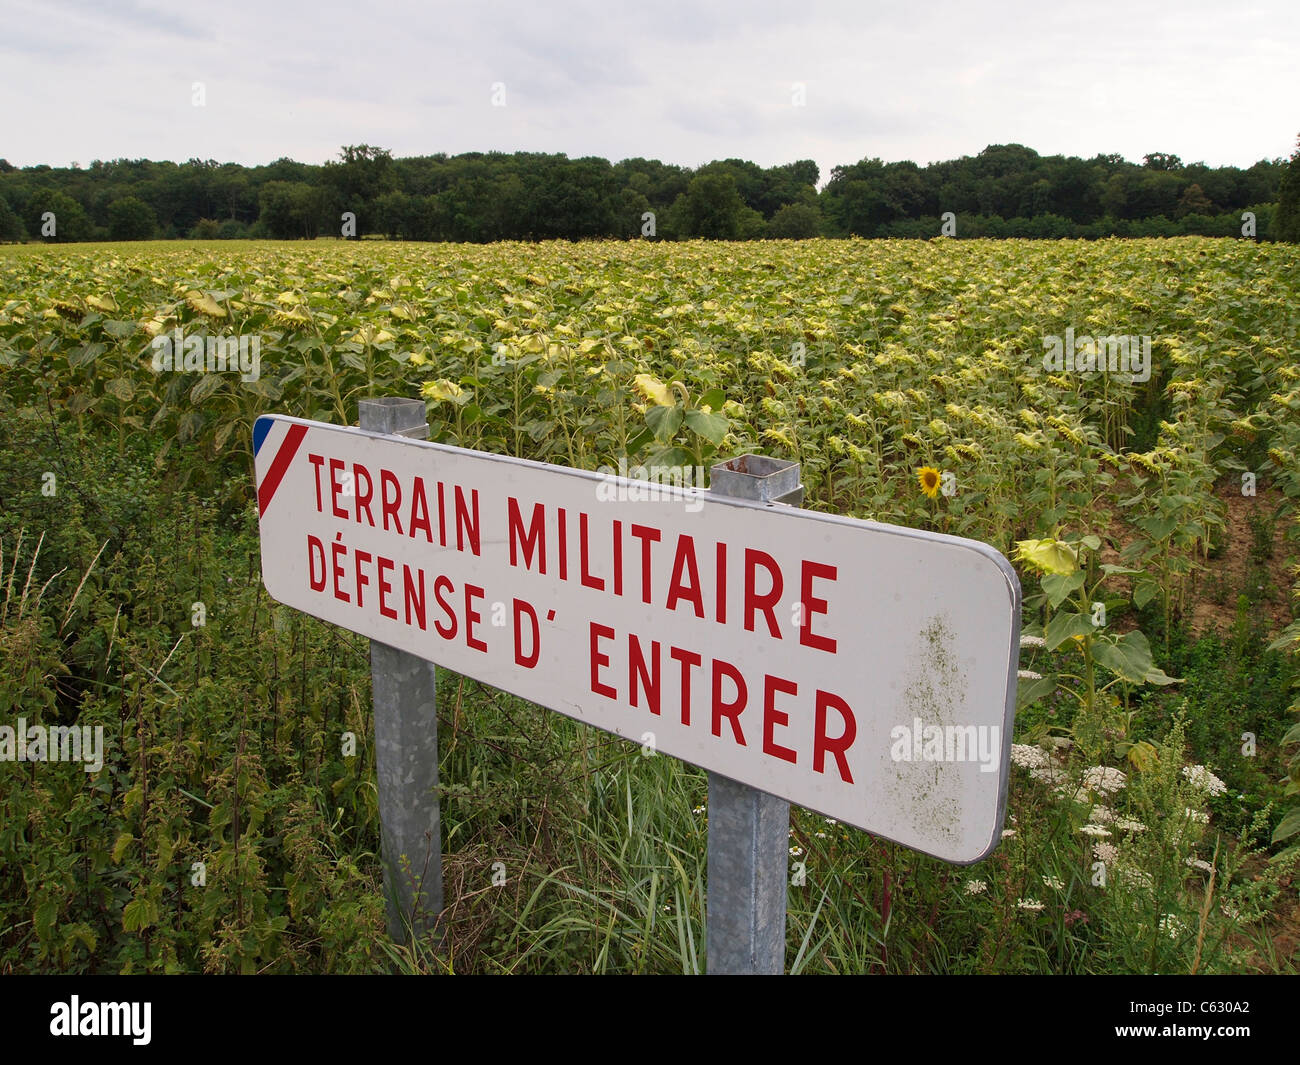 Military Terrain warning sign at a large sunflower field, Loire valley, France Stock Photo